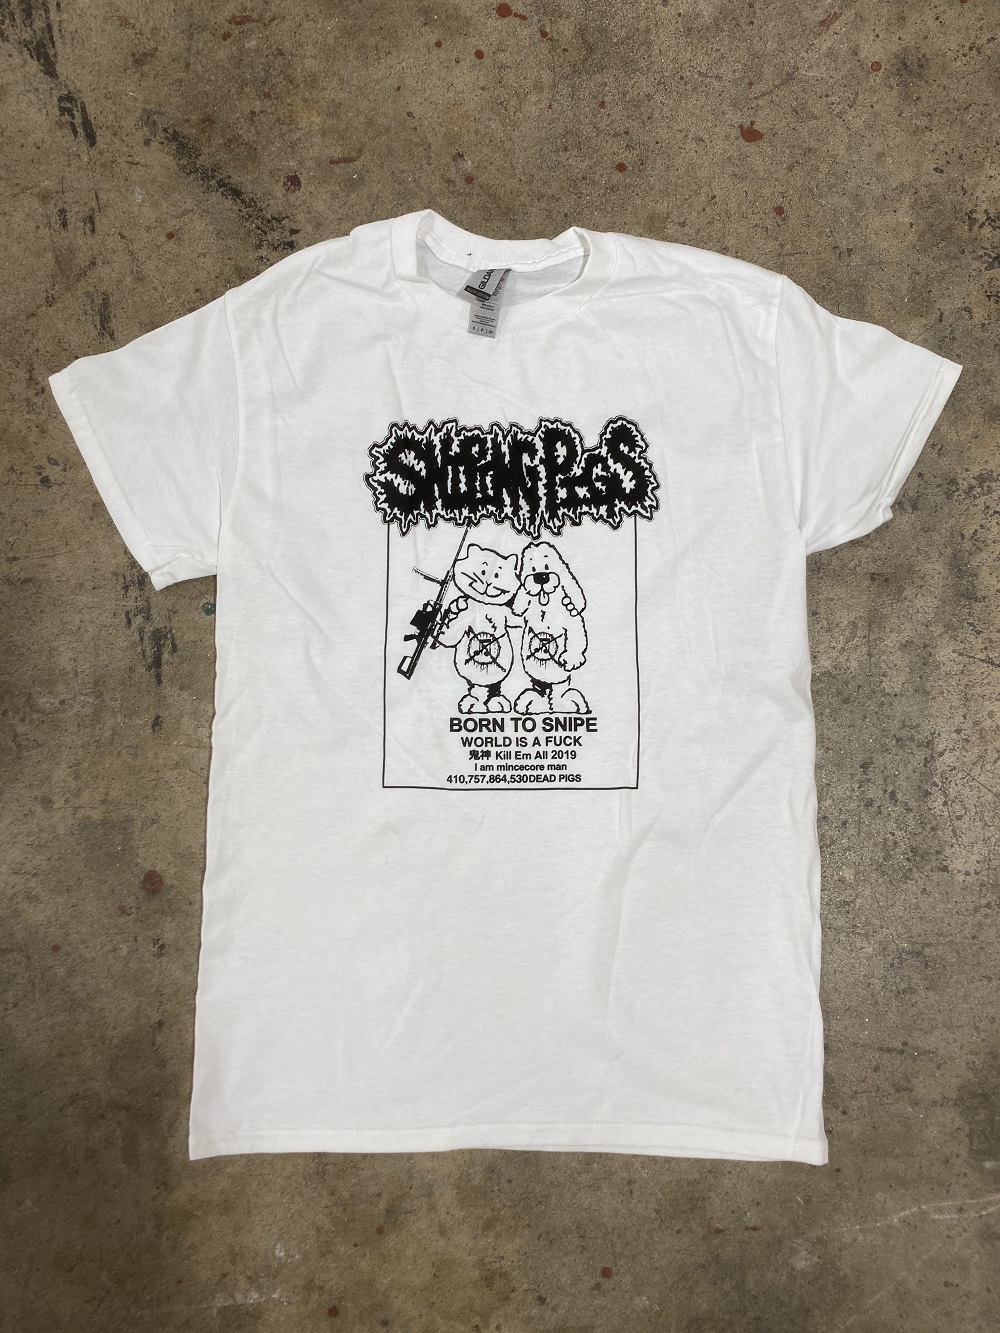 Sniping Pigs - Born To Snipe Shirt (SMALL)